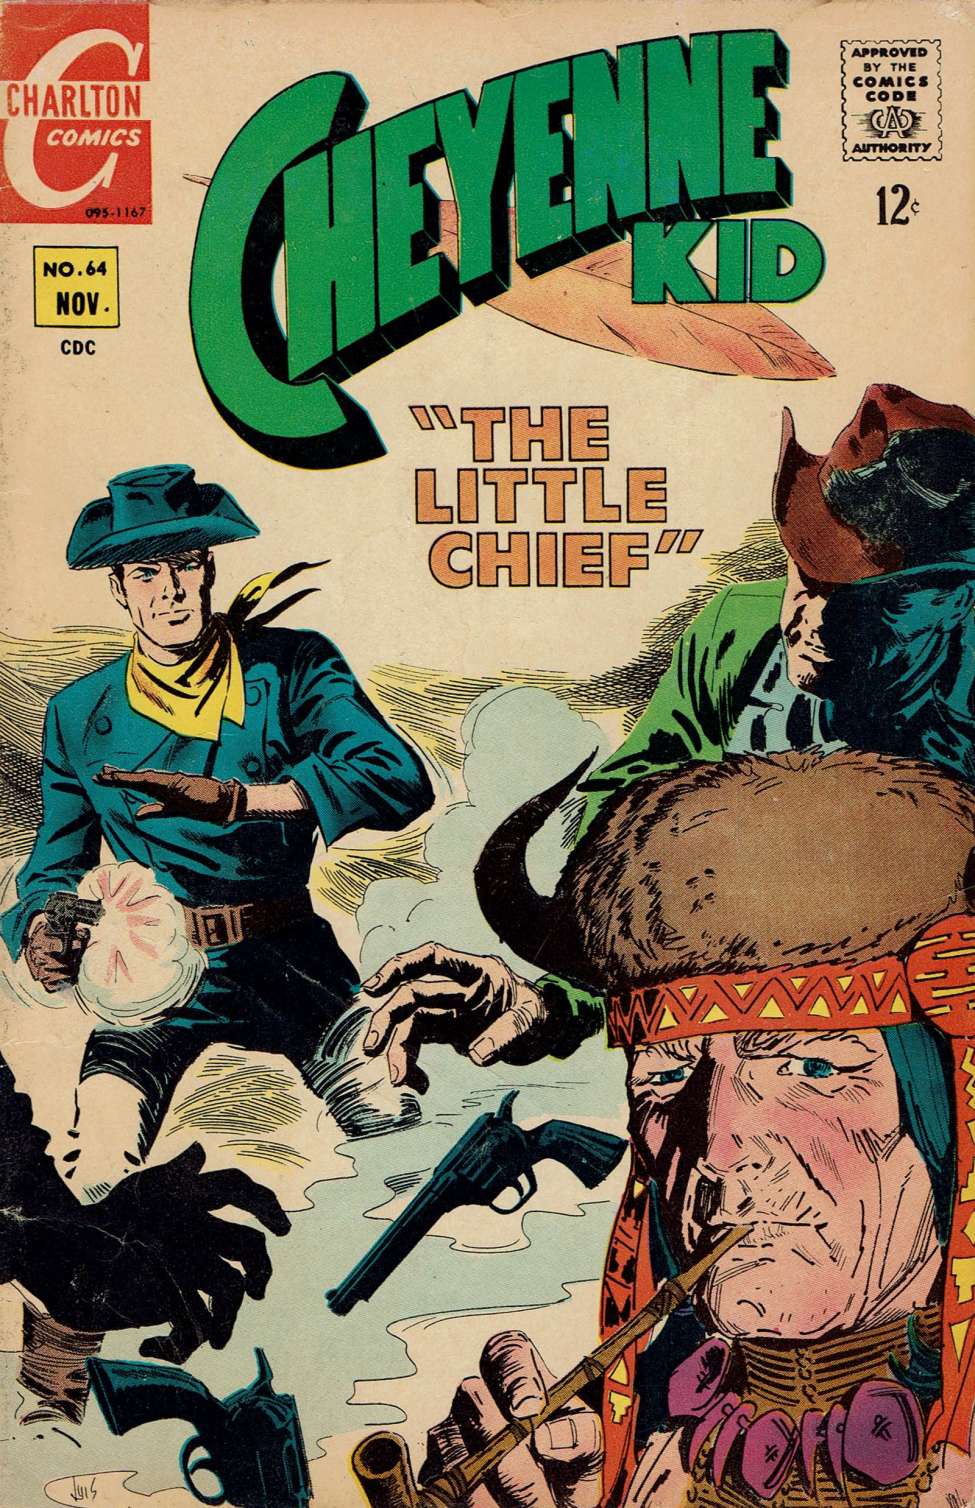 Book Cover For Cheyenne Kid 64 - Version 2